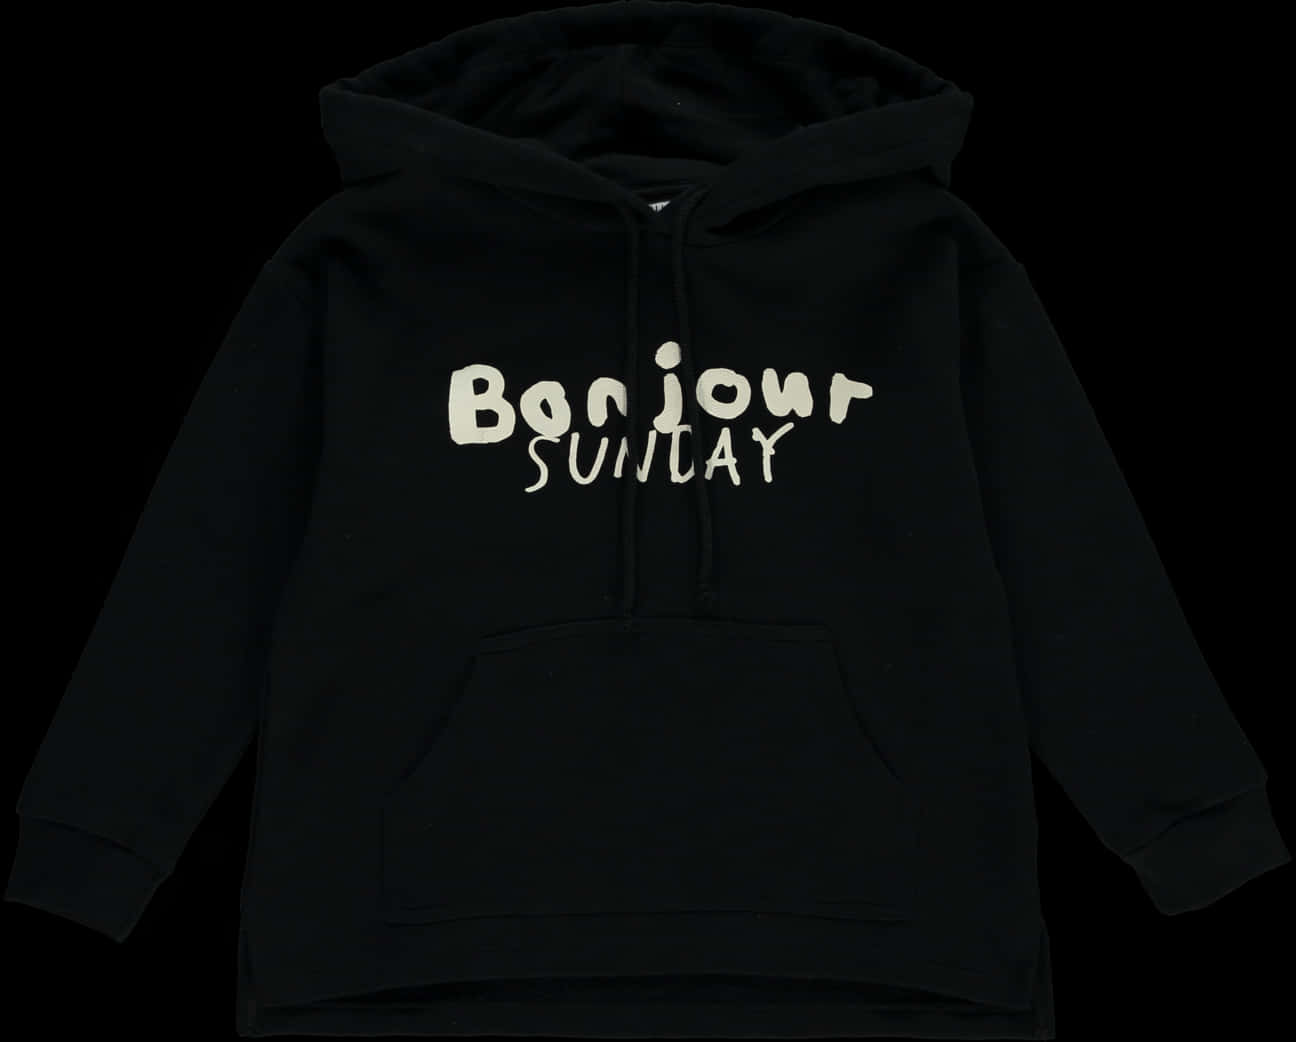 A Black Sweatshirt With White Text